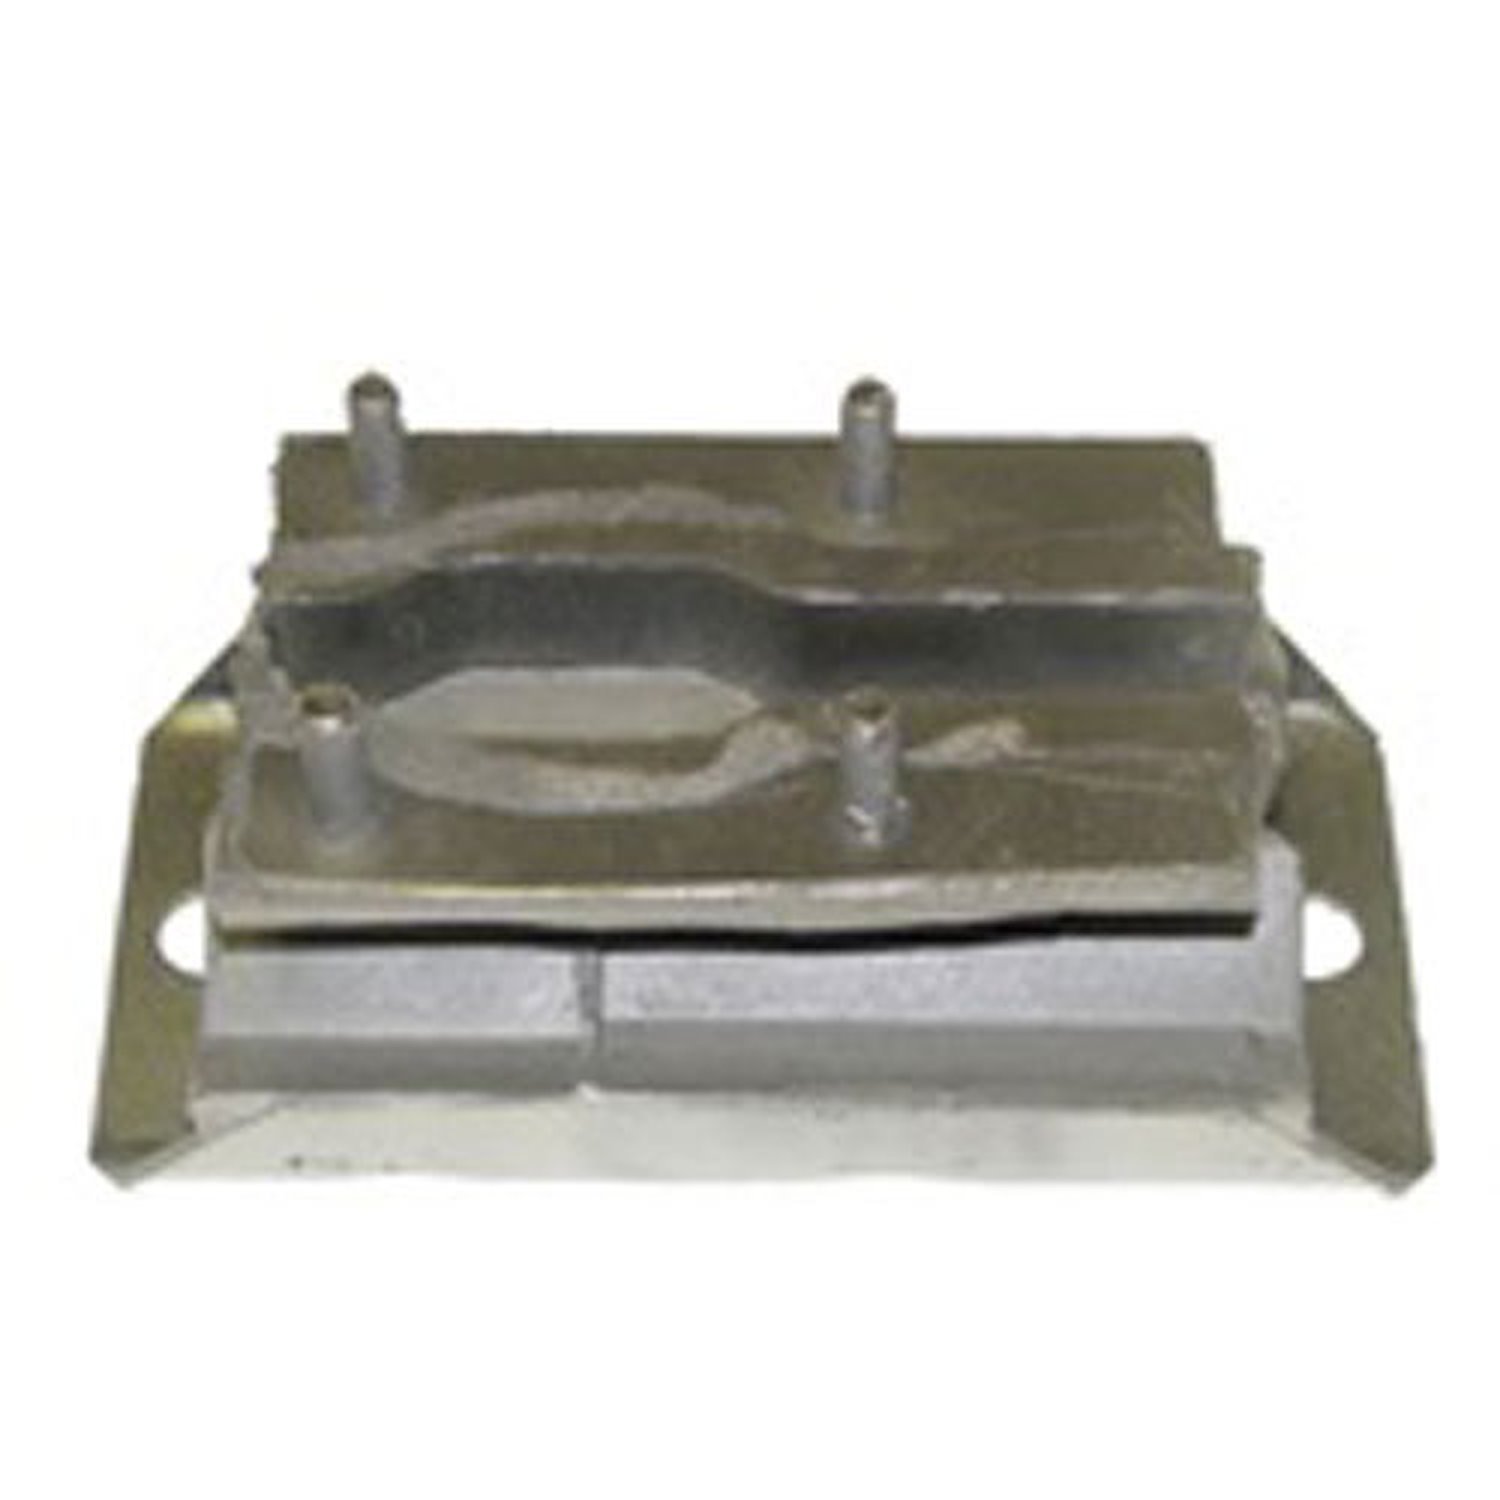 This transmission mount from Omix-ADA fits 04-05 Jeep 2WD Libertys with the 42RLE automatic transmission.